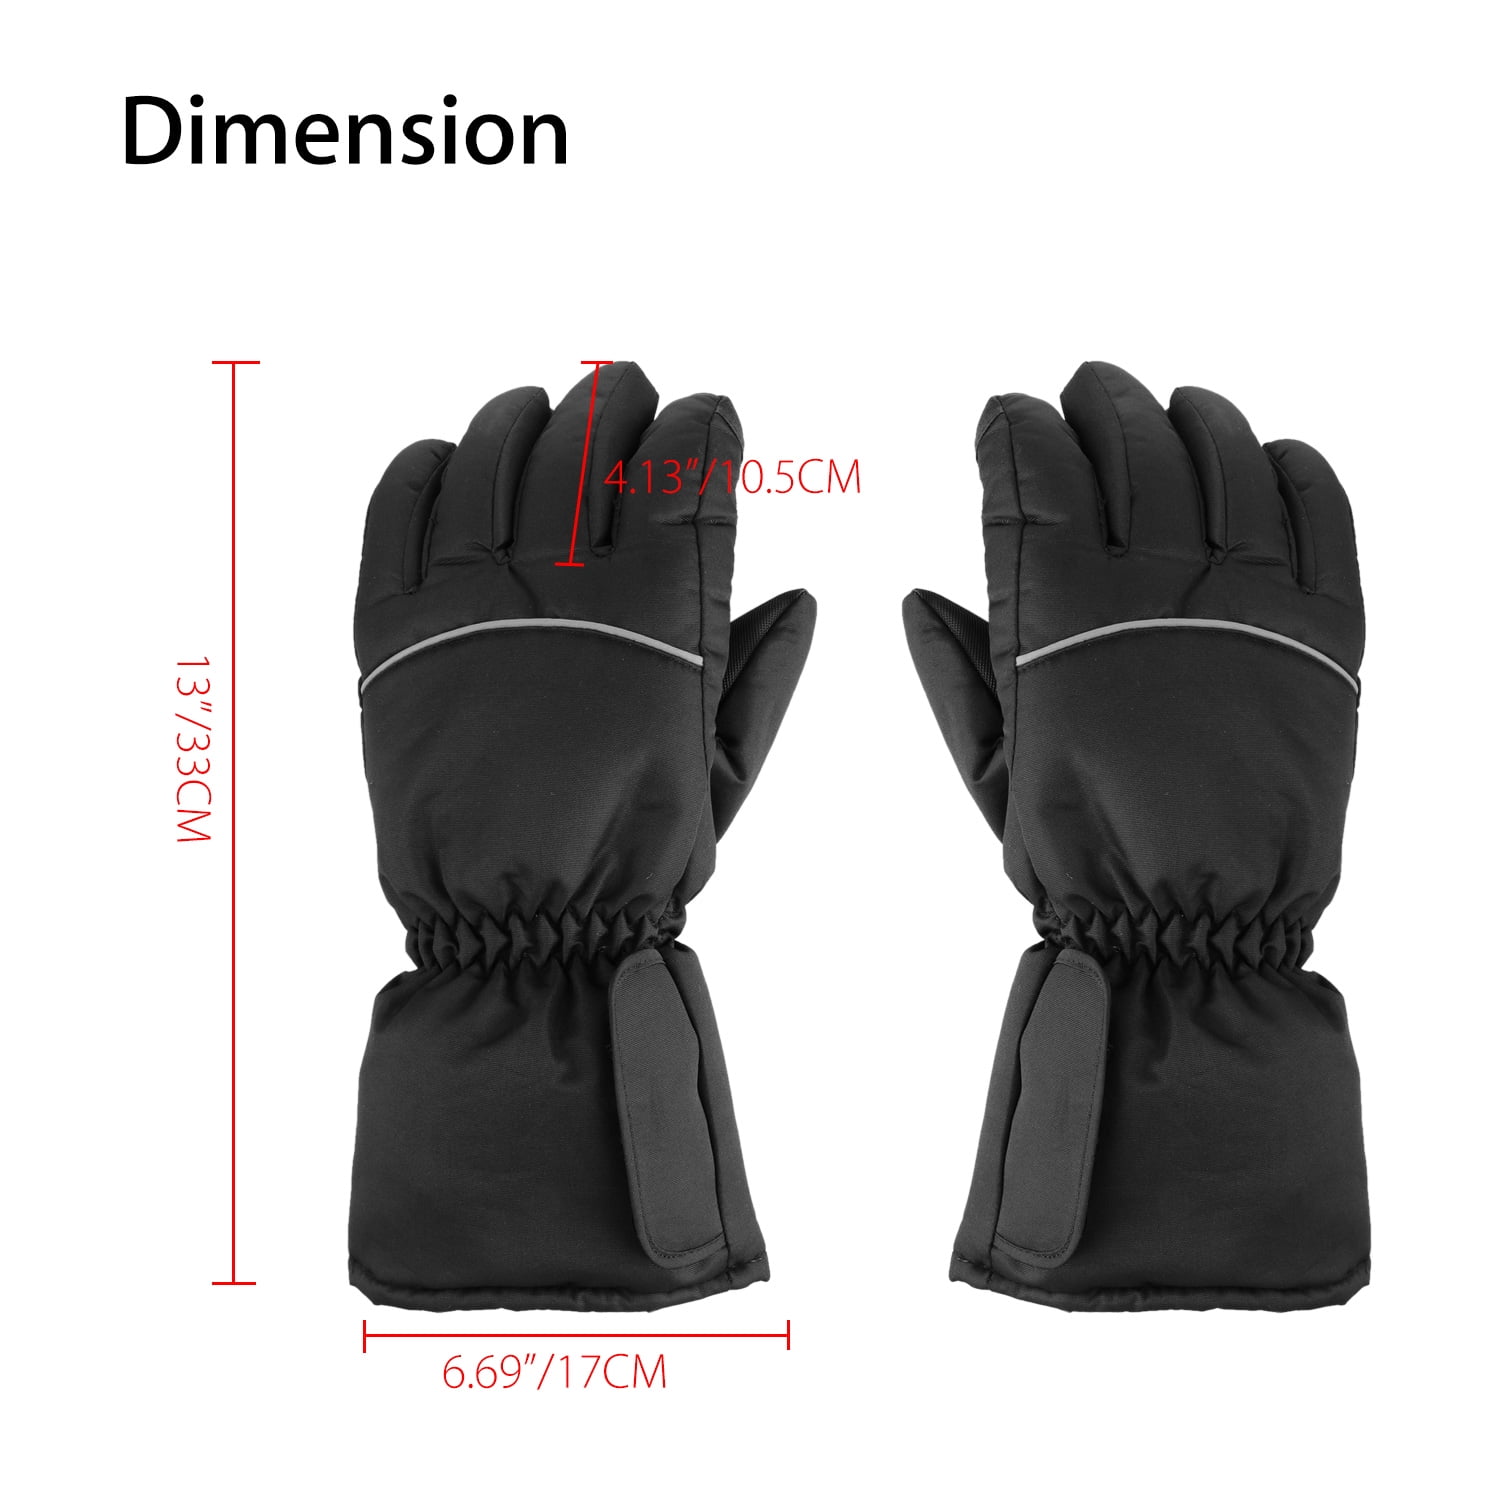 Battery Powered Electric Heating Gloves Touchscreen Thick Thermal Winter Driving Gloves for Skiing Hiking Cycling Climbing Loiion Heated Leather Gloves for Women Men